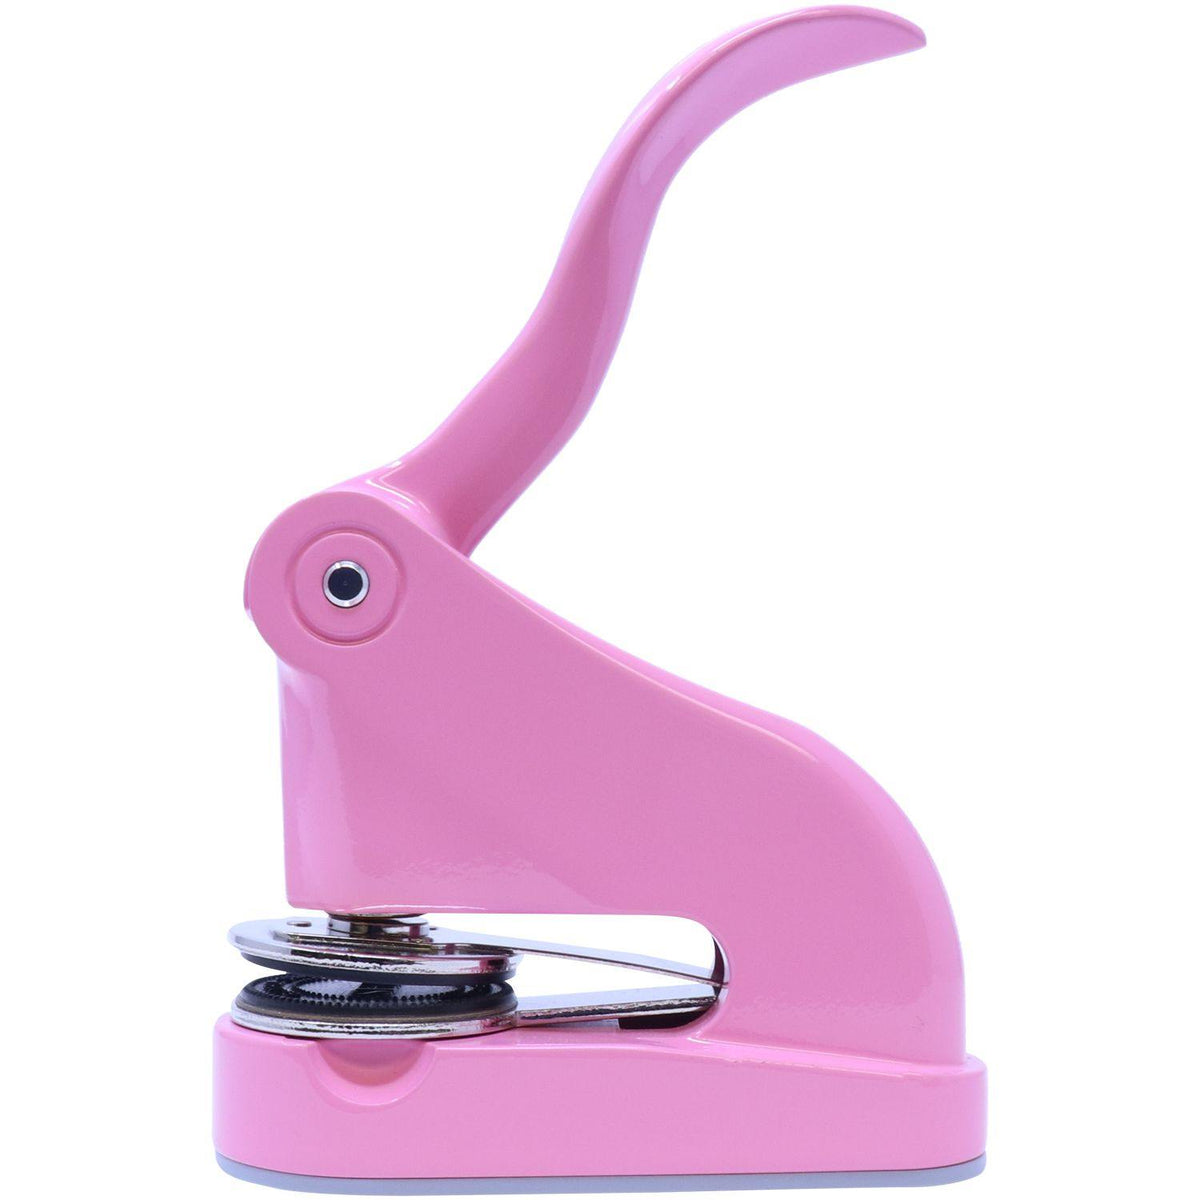 Forester Pink Gift Embosser - Engineer Seal Stamps - Embosser Type_Desk, Embosser Type_Gift, Type of Use_Professional, Use_Heavy Duty